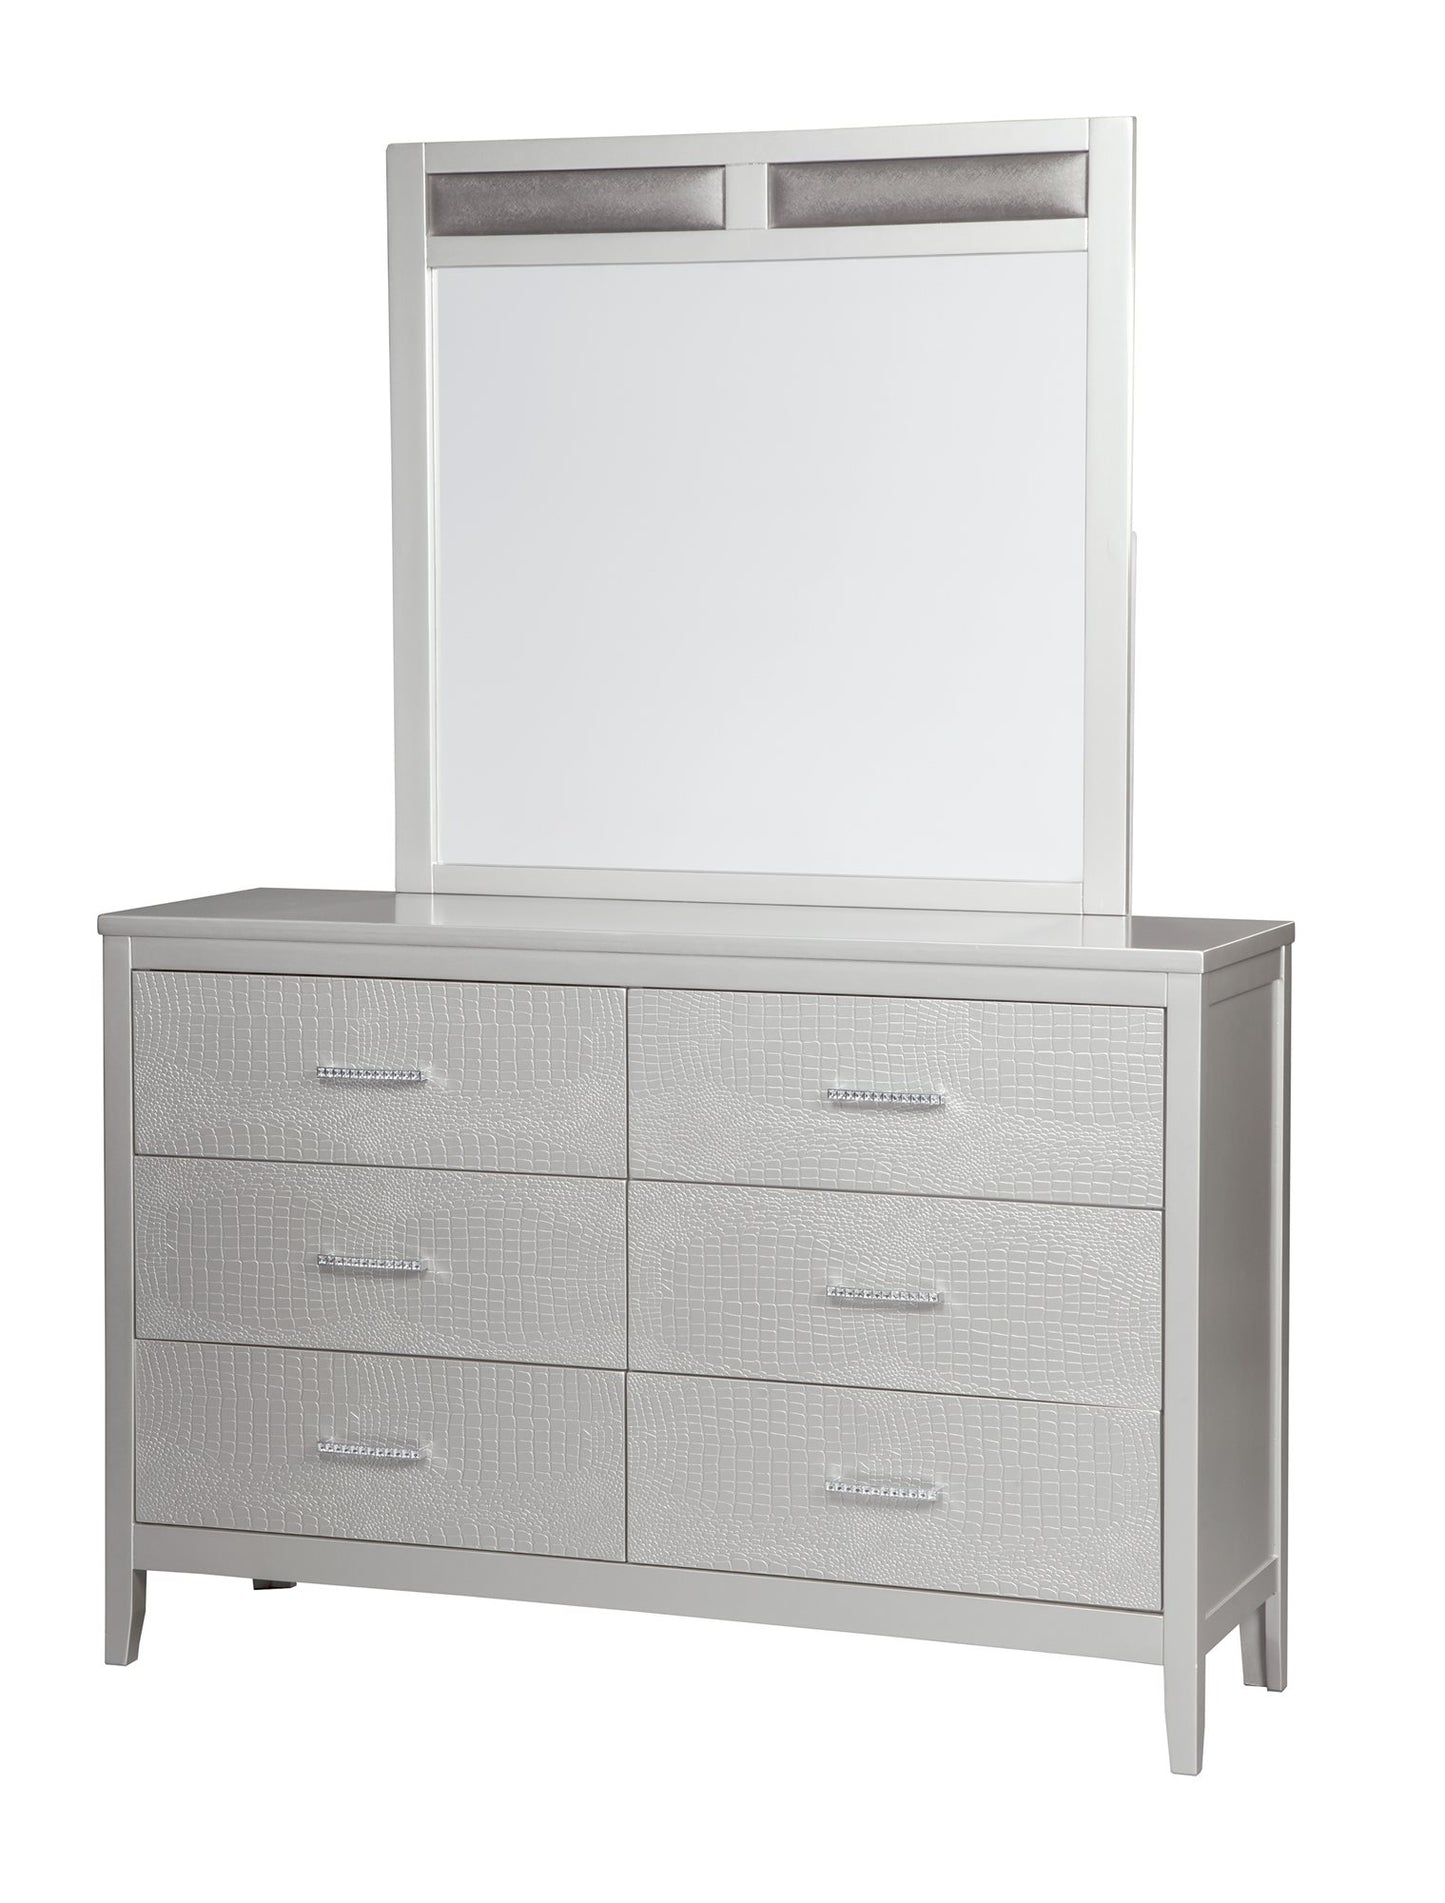 Ashley Olivet 6PC Bedroom Set Cal King Panel Bed Two Nightstand Dresser Mirror Chest in Silver